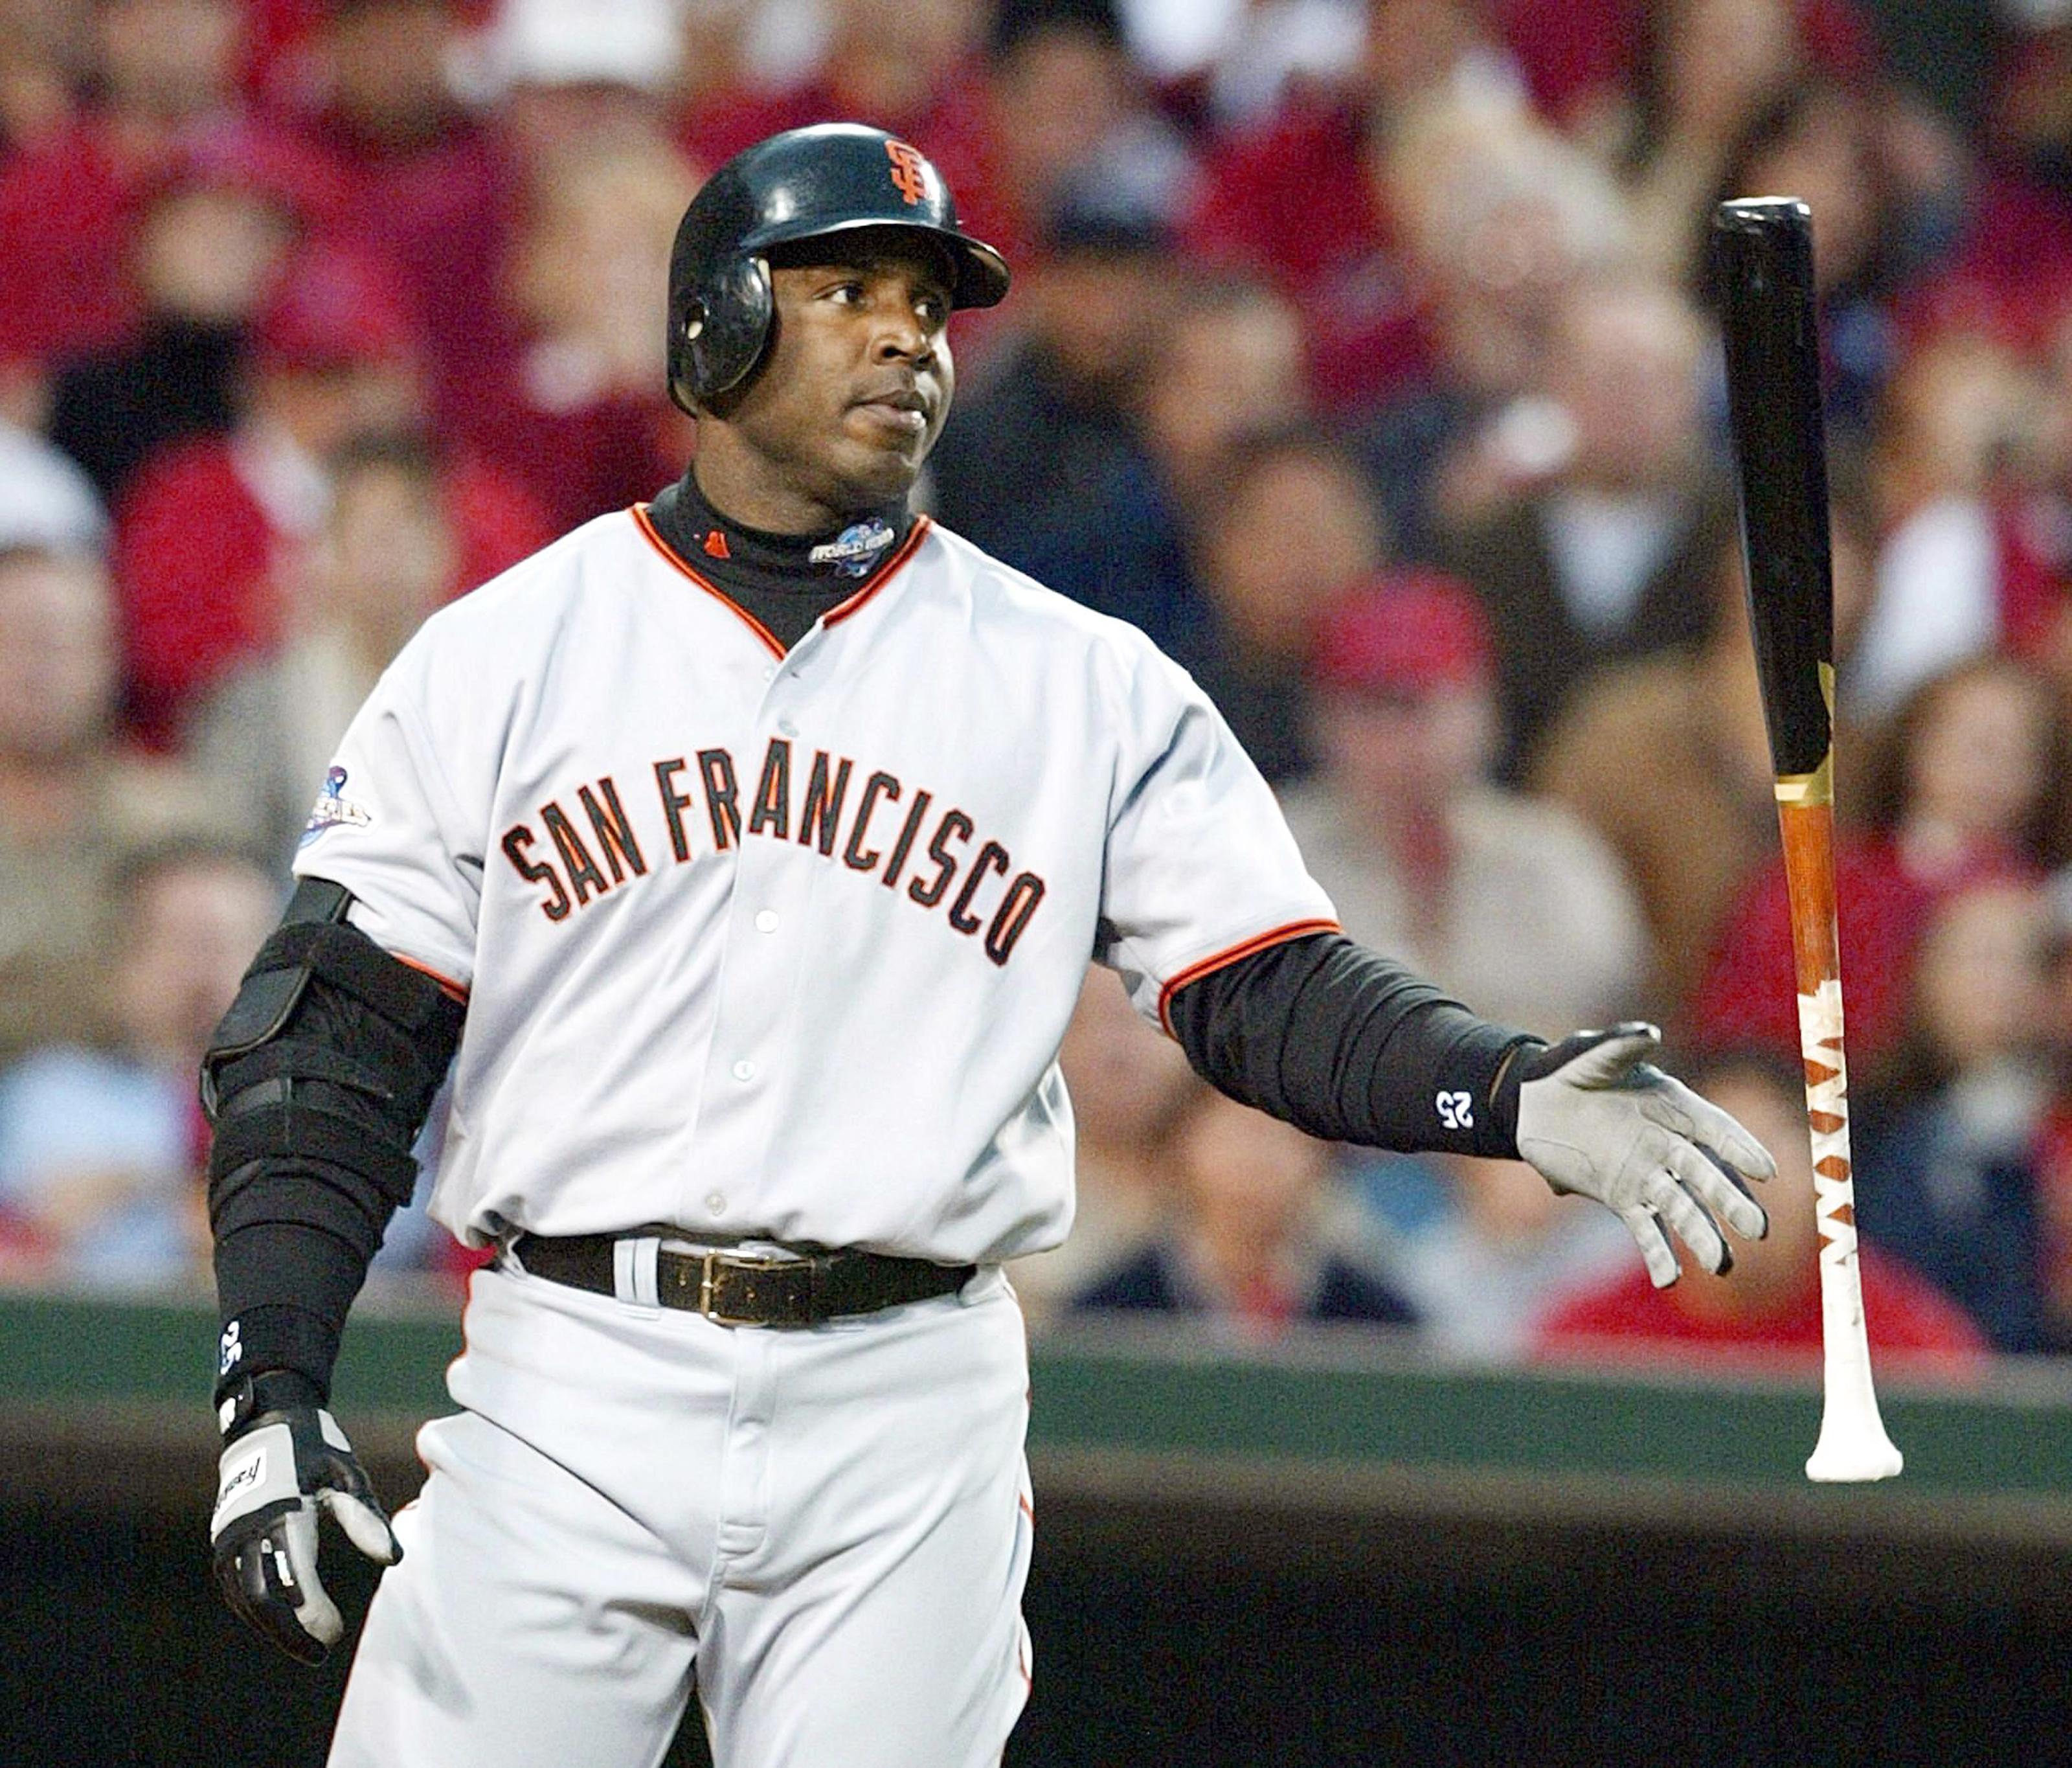 Barry Bonds is one of the most controversial baseball players of all time. 